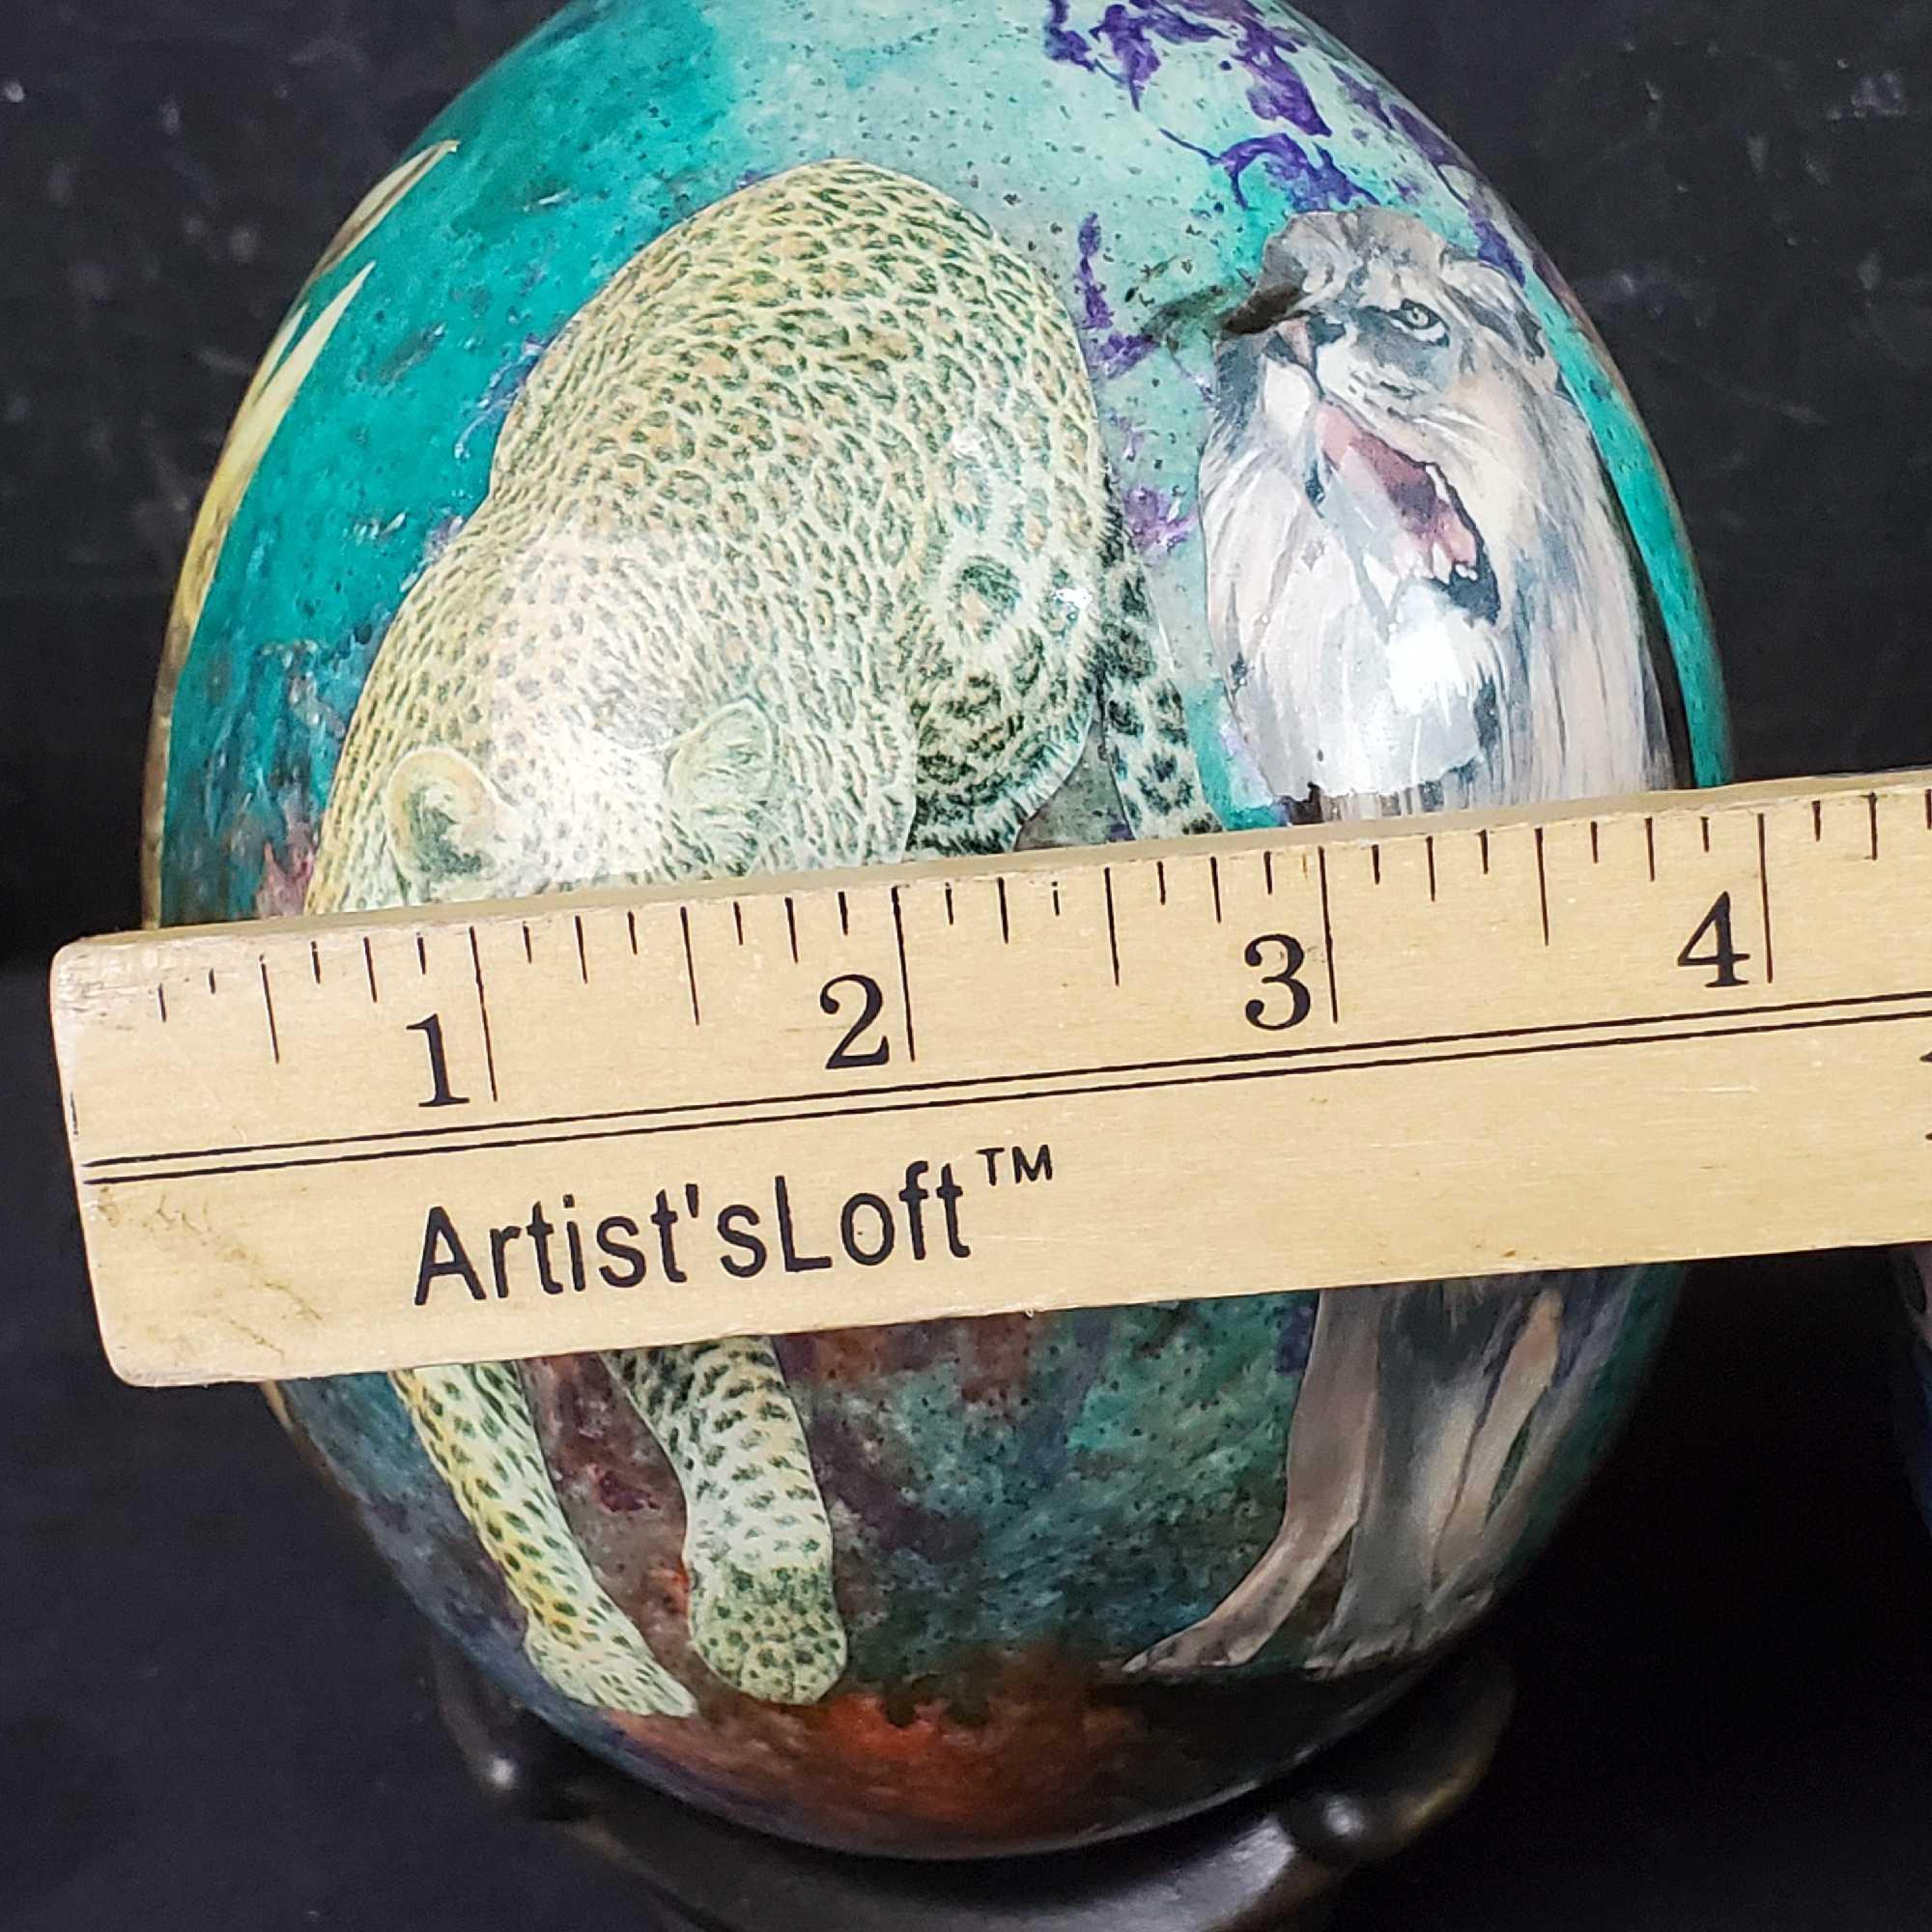 Chinoiserie Handmade Cloisonne Egg Sherry Rowe signed african safari handmade/painted egg With stand